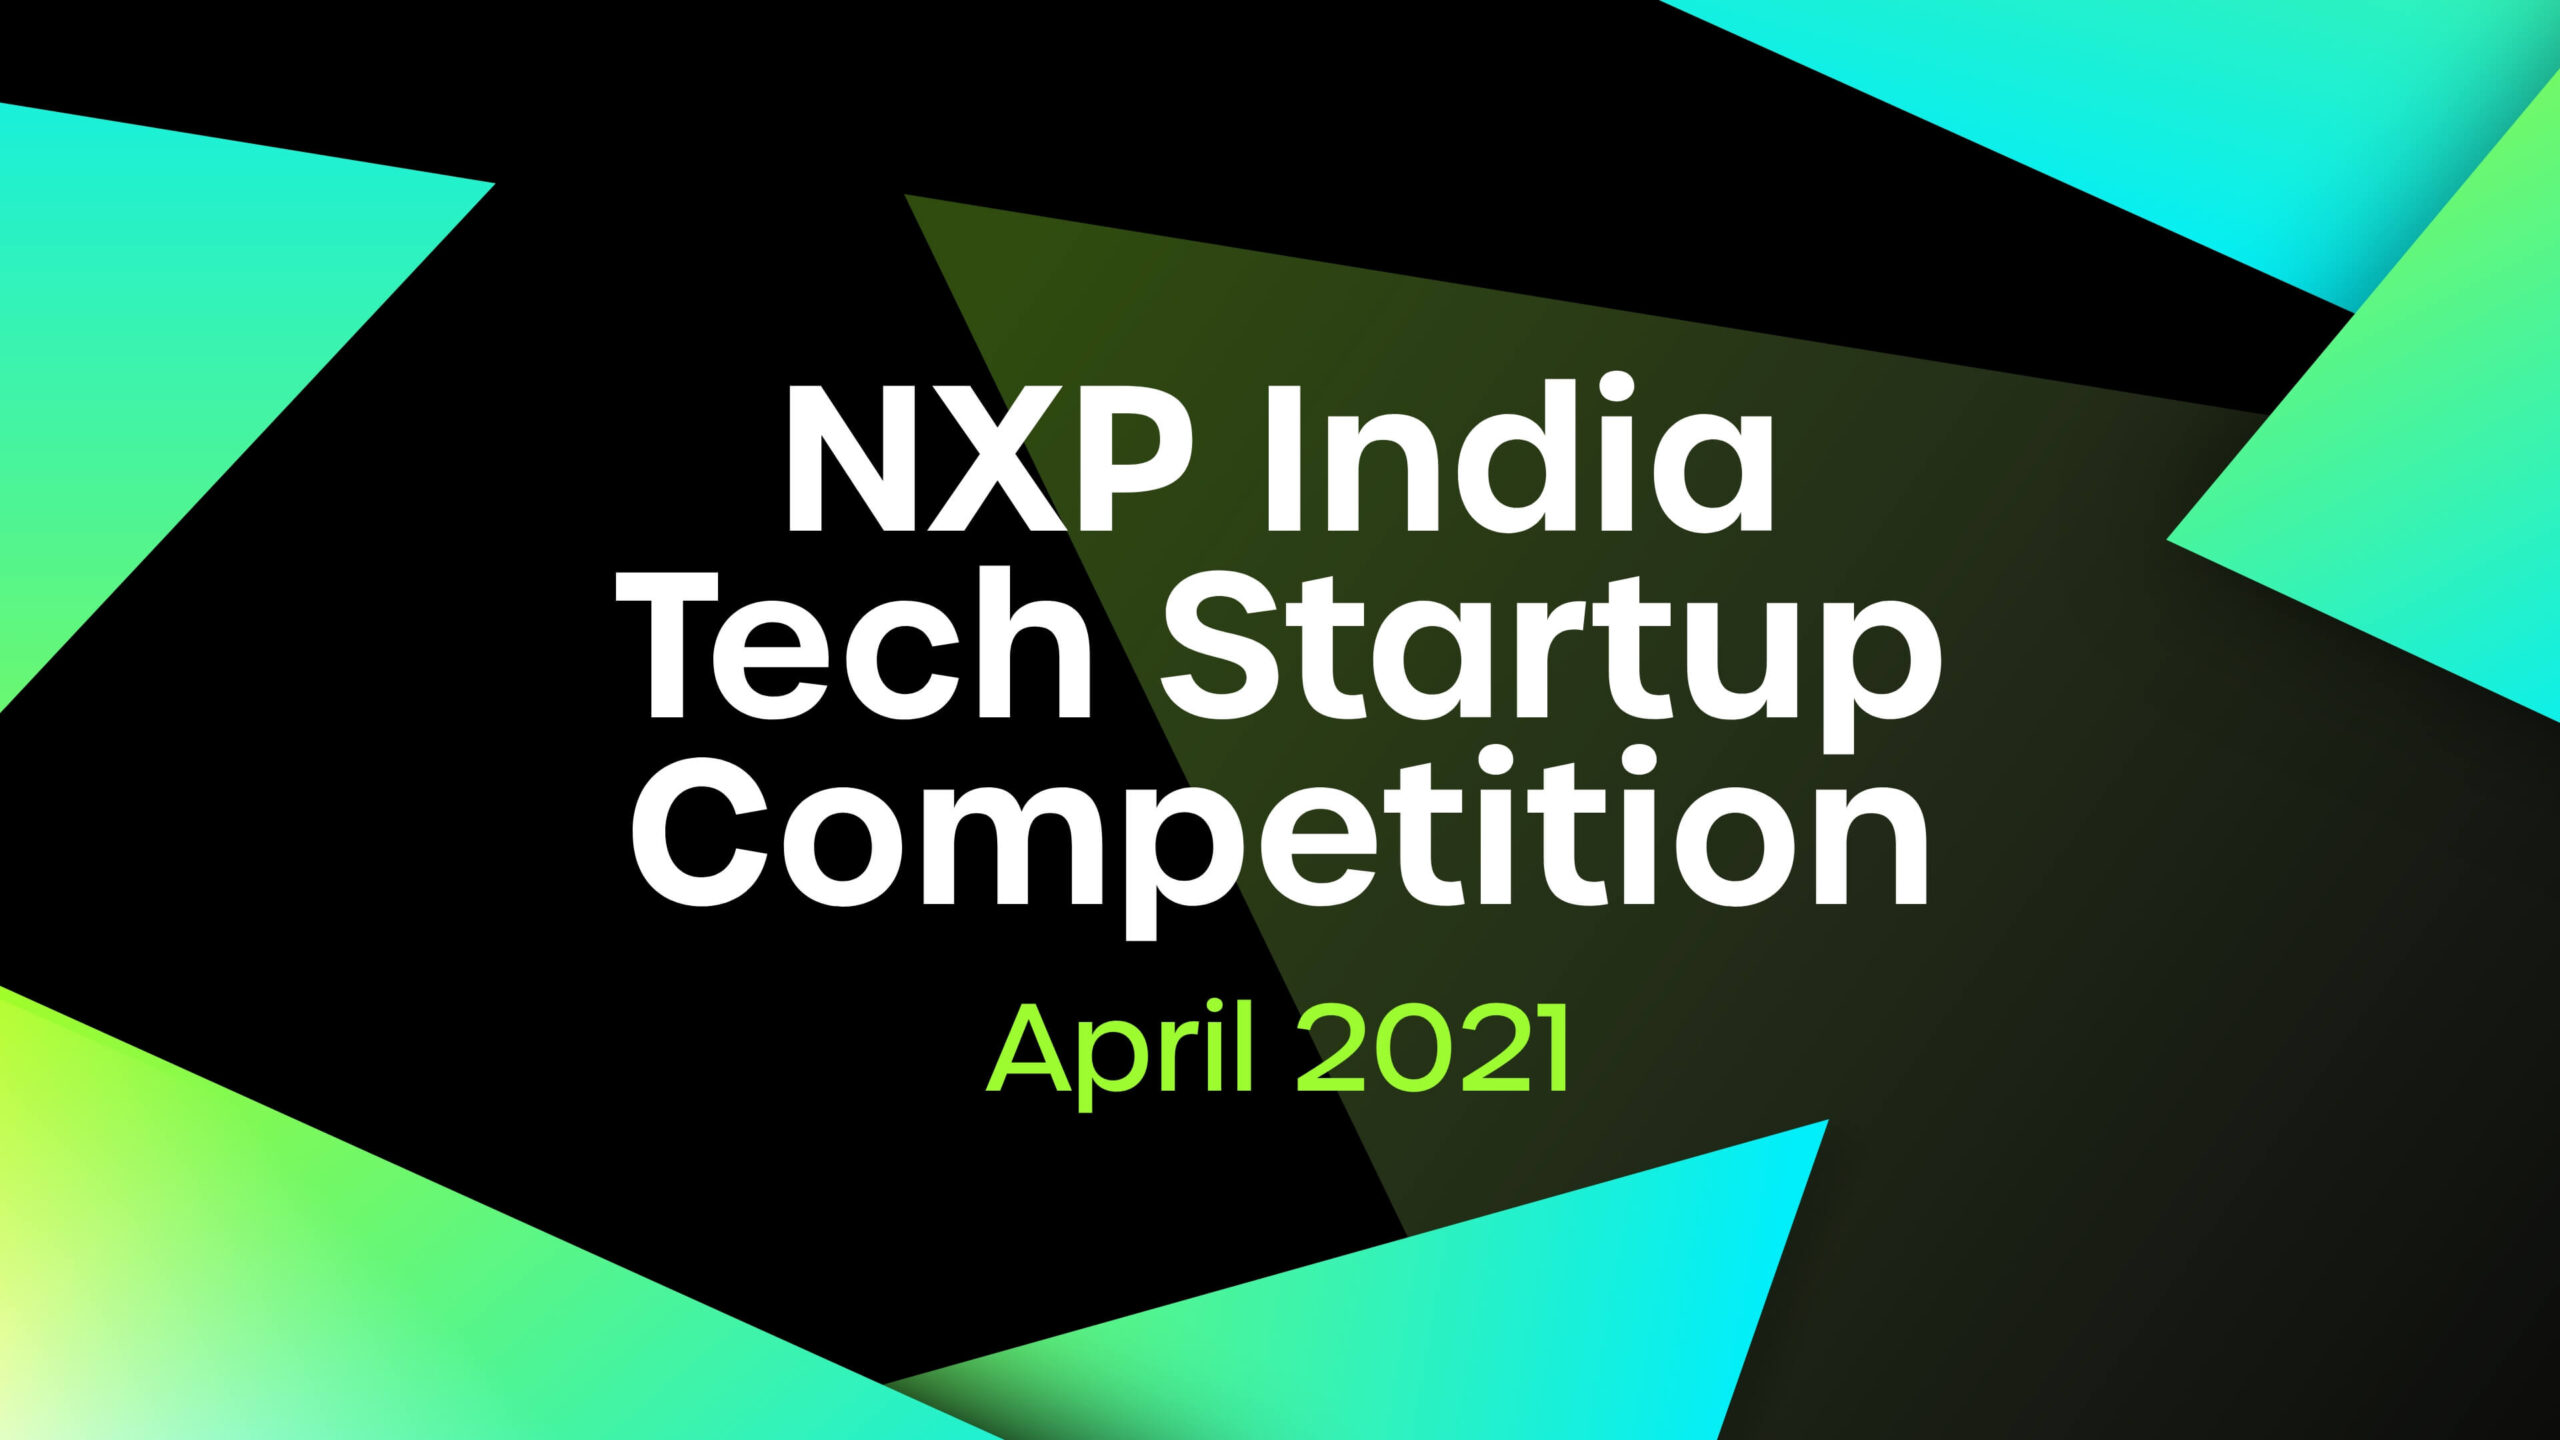 NXP India Tech Startup Competition